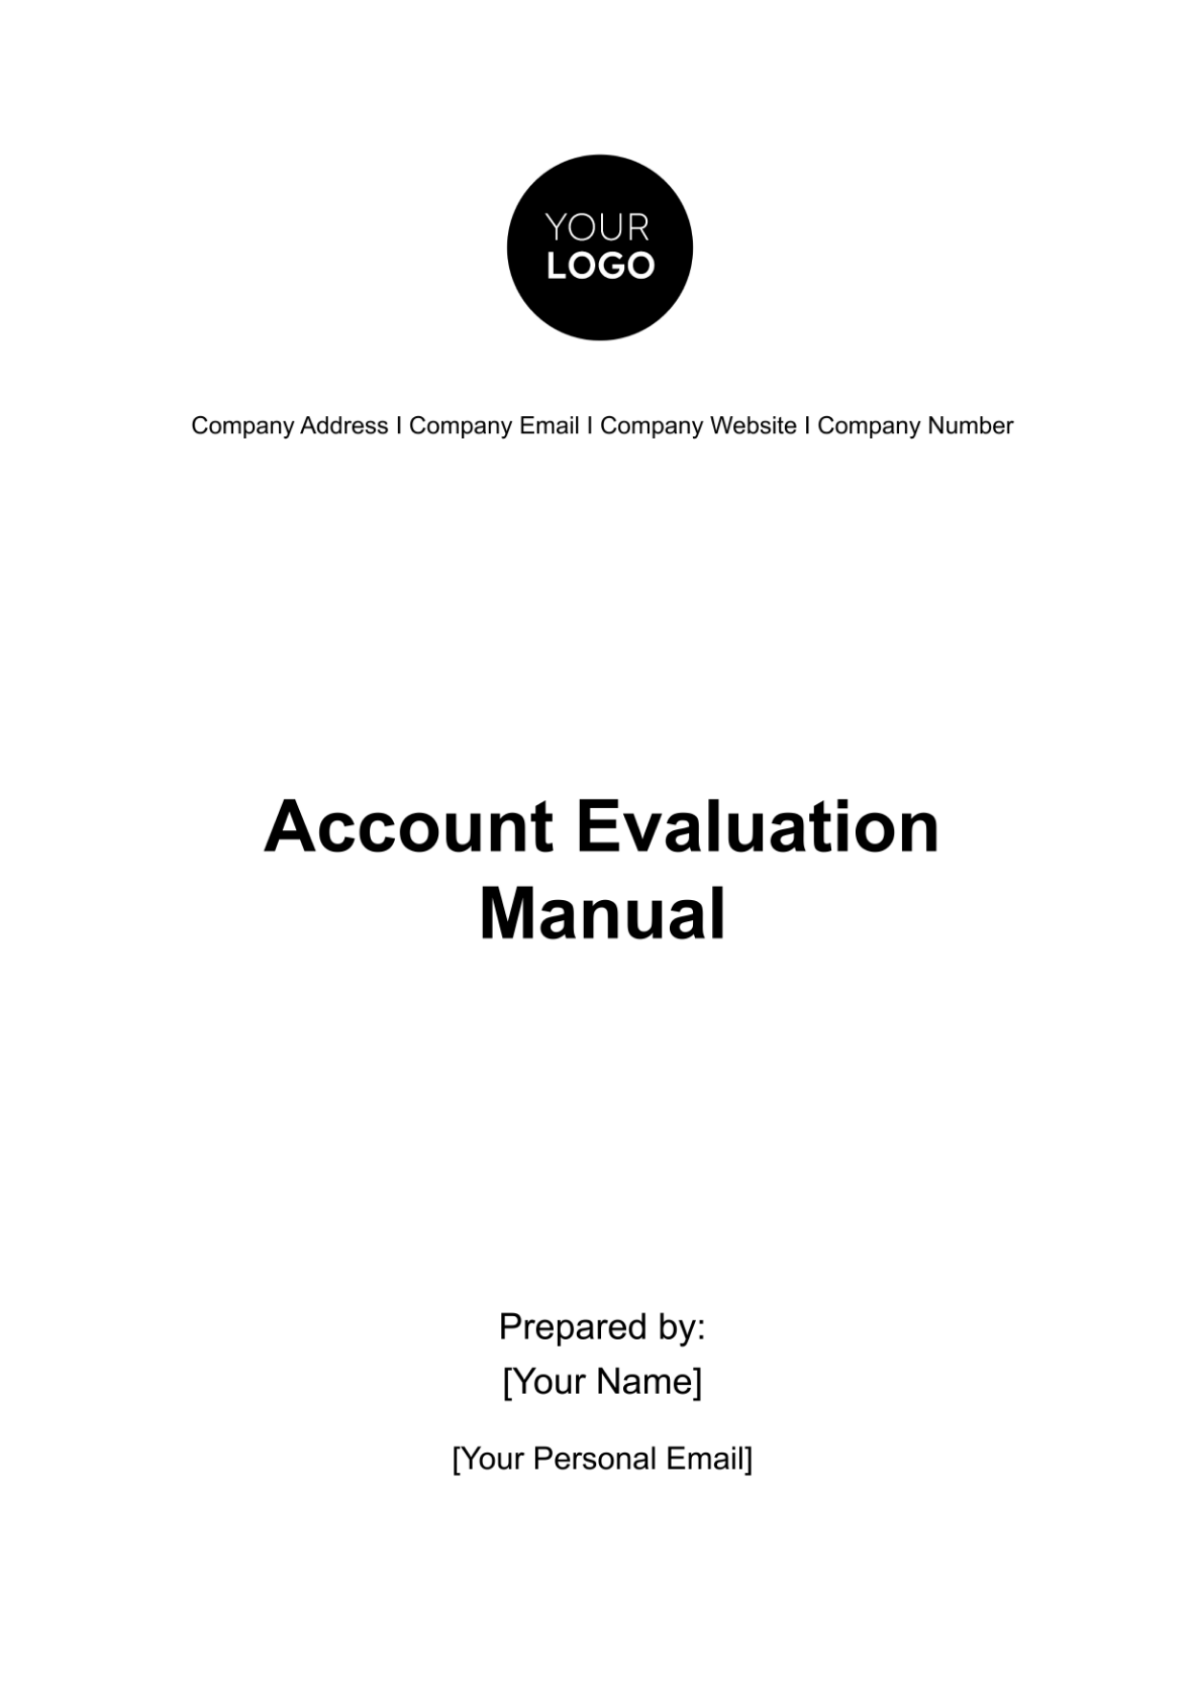 Free Account Evaluation Manual Template